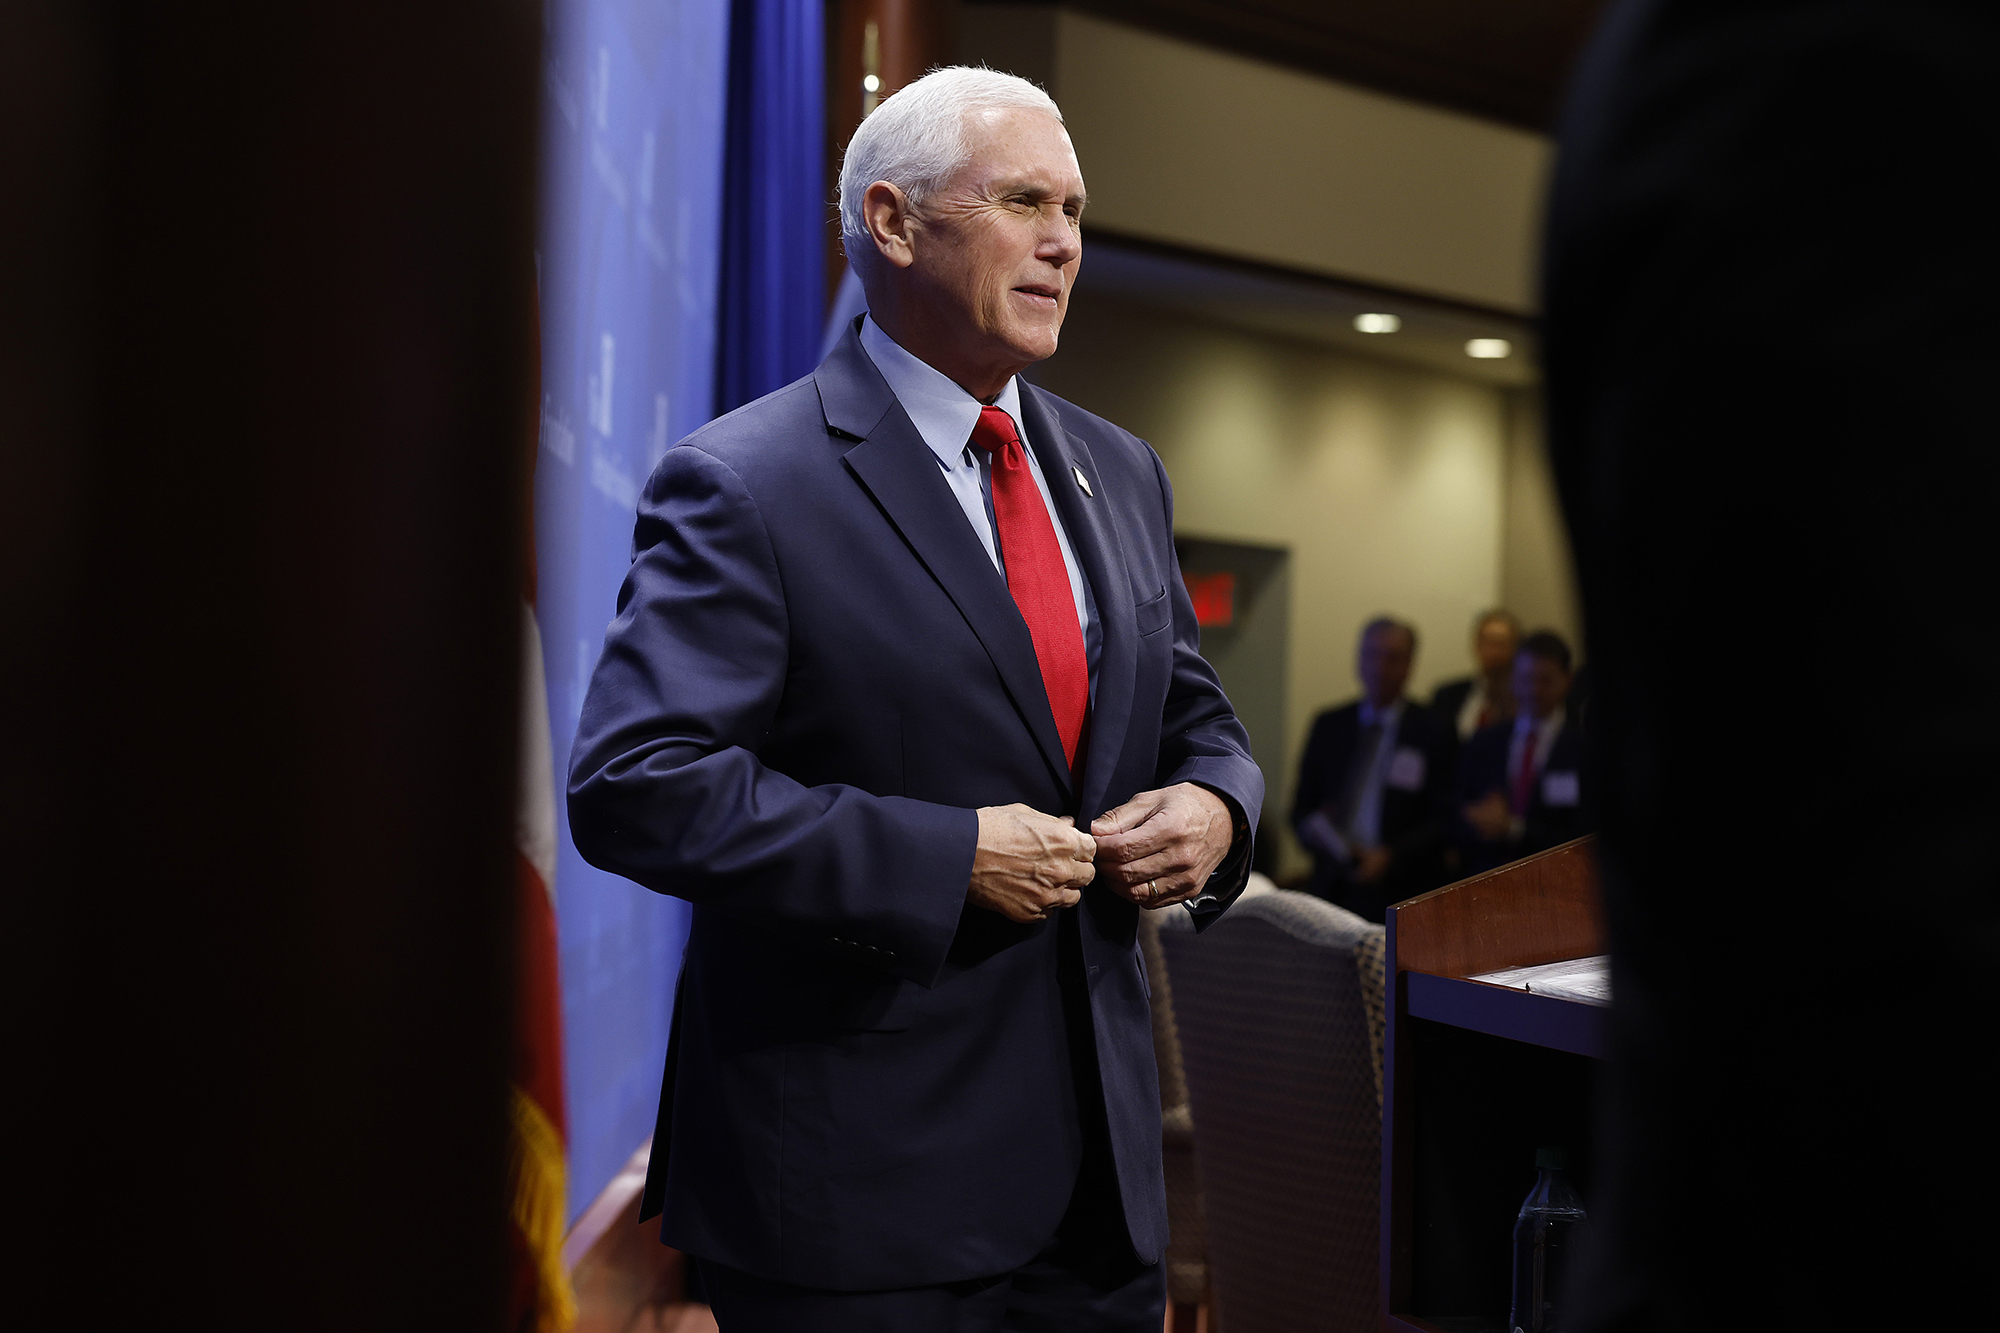 PHOTO: Former Vice President Mike Pence speaks during an event in Washington, Oct. 19, 2022.